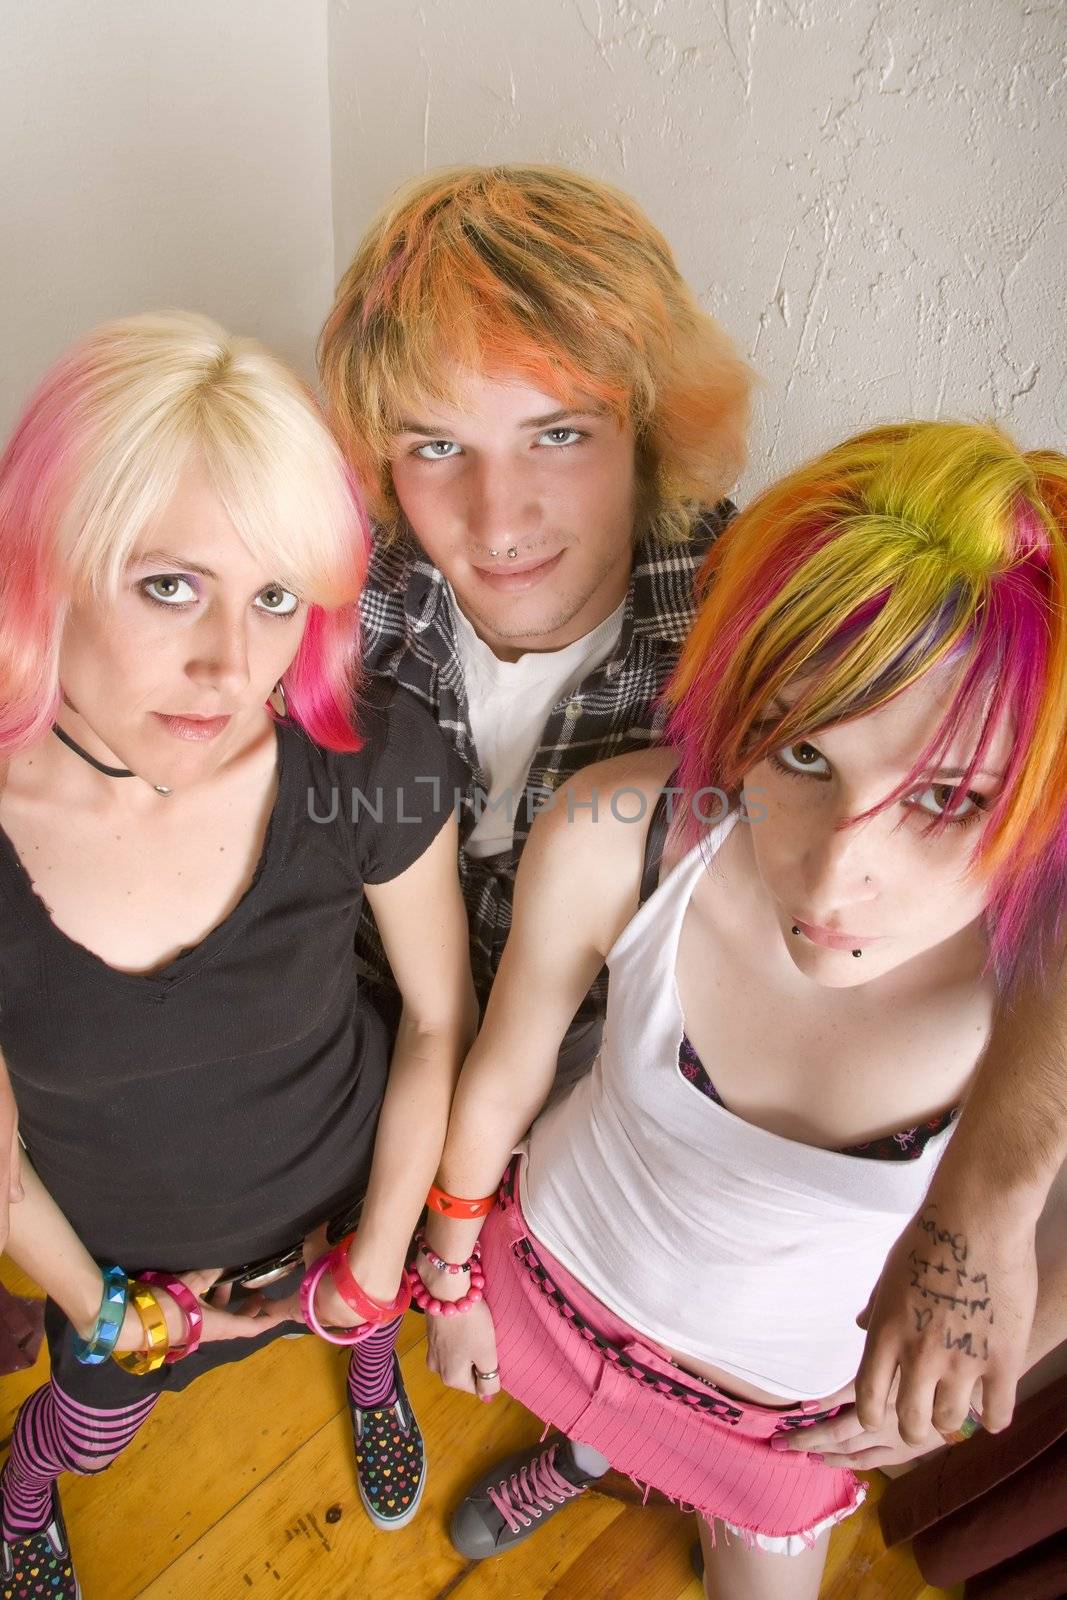 Three hip young people with brightly colored hair